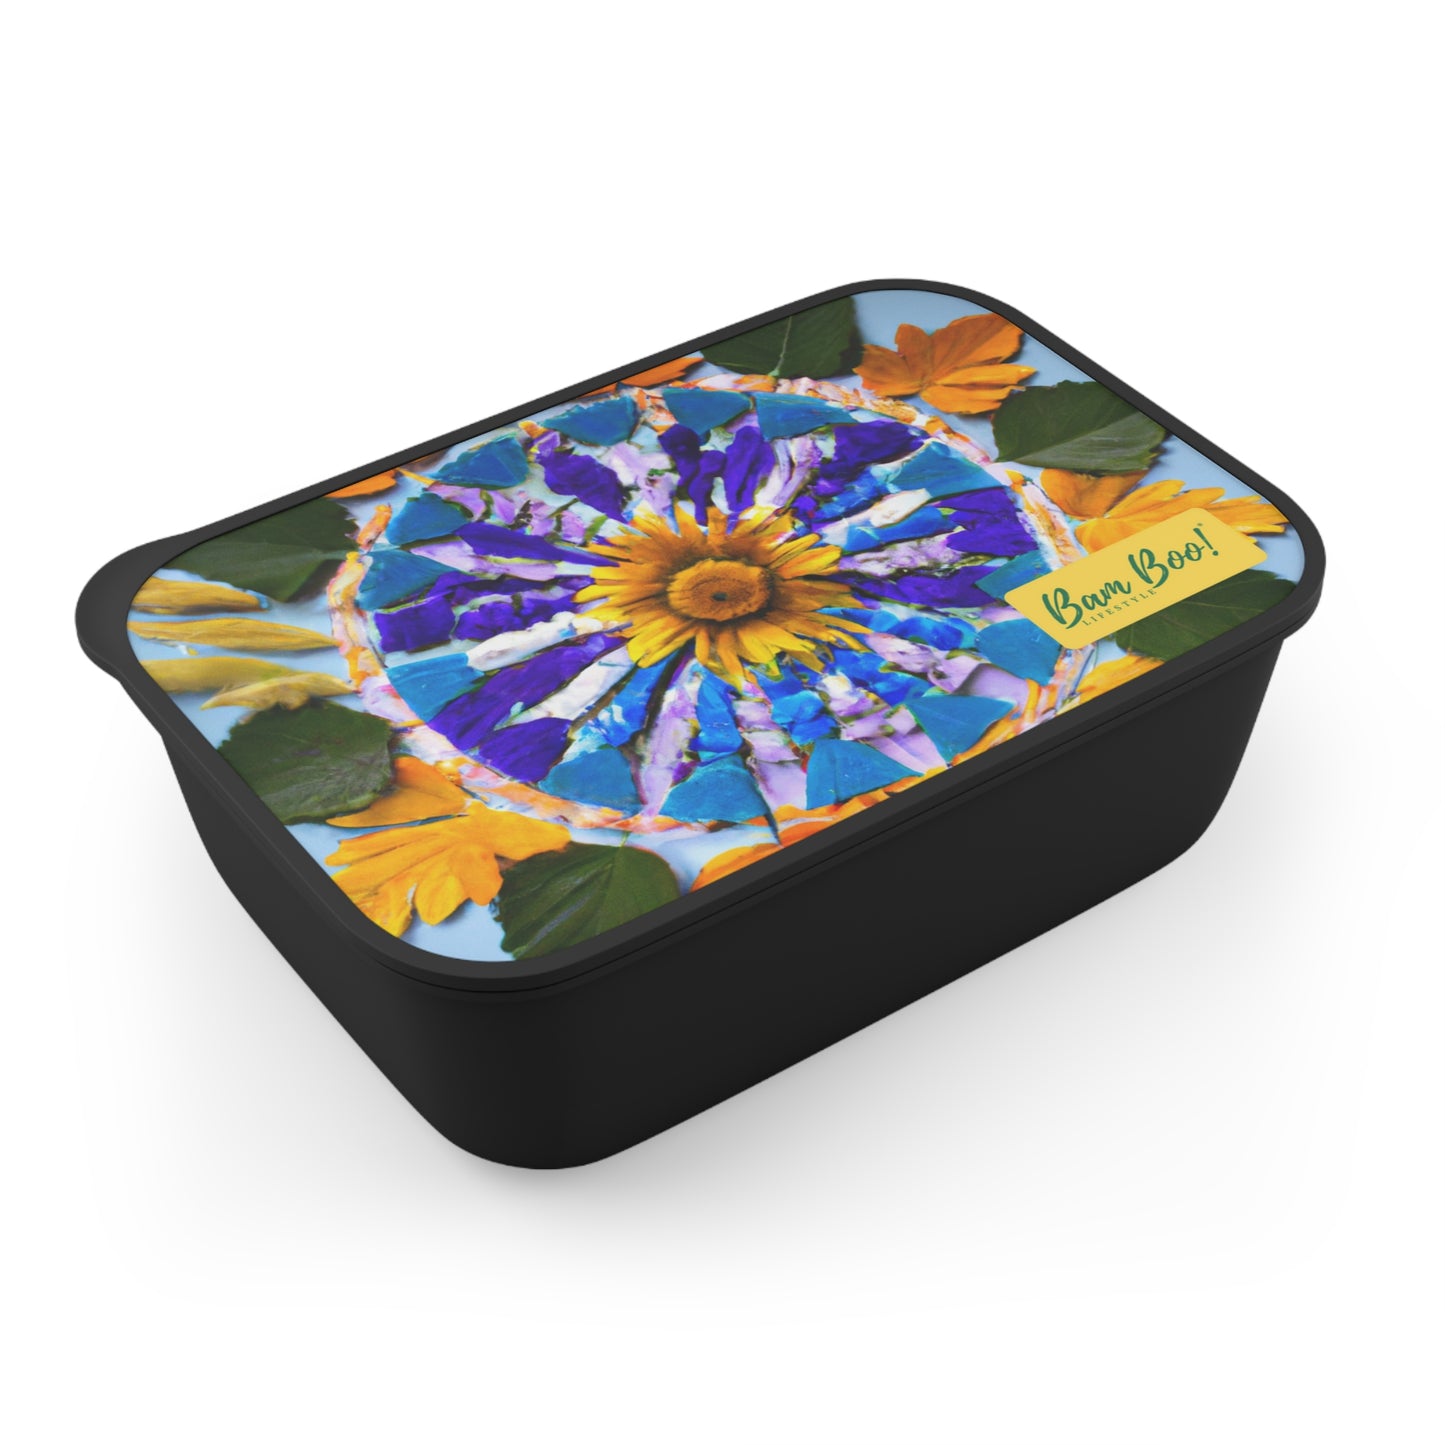 "Connection to Nature: A Creative Mandala". - Bam Boo! Lifestyle PLA Bento Box with Band and Utensils